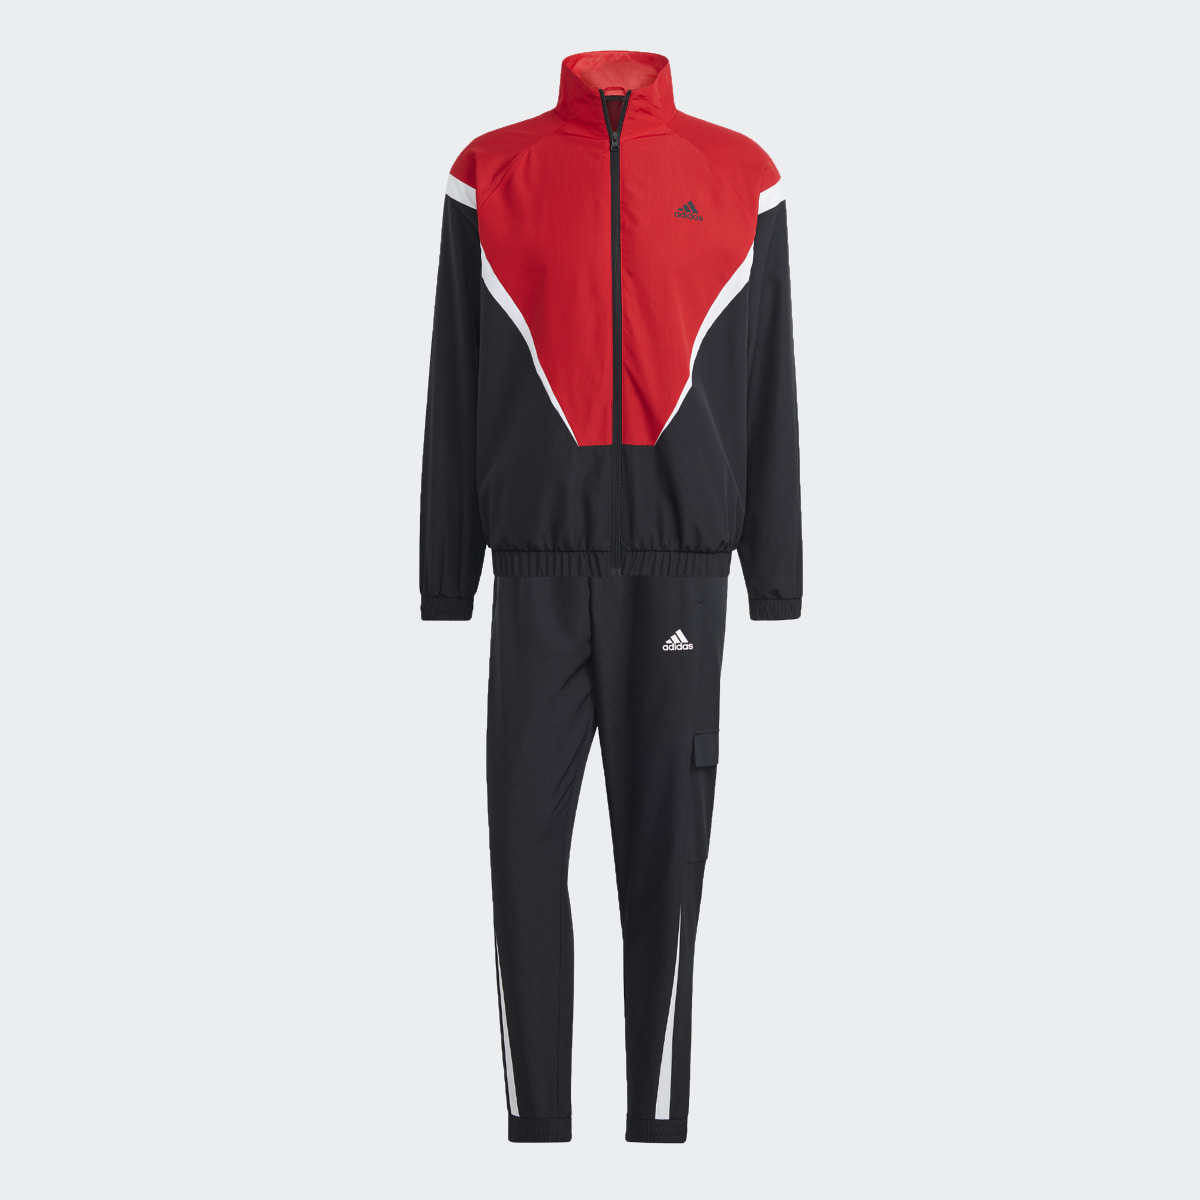 Adidas Sportswear Woven Non-Hooded Track Suit. 5